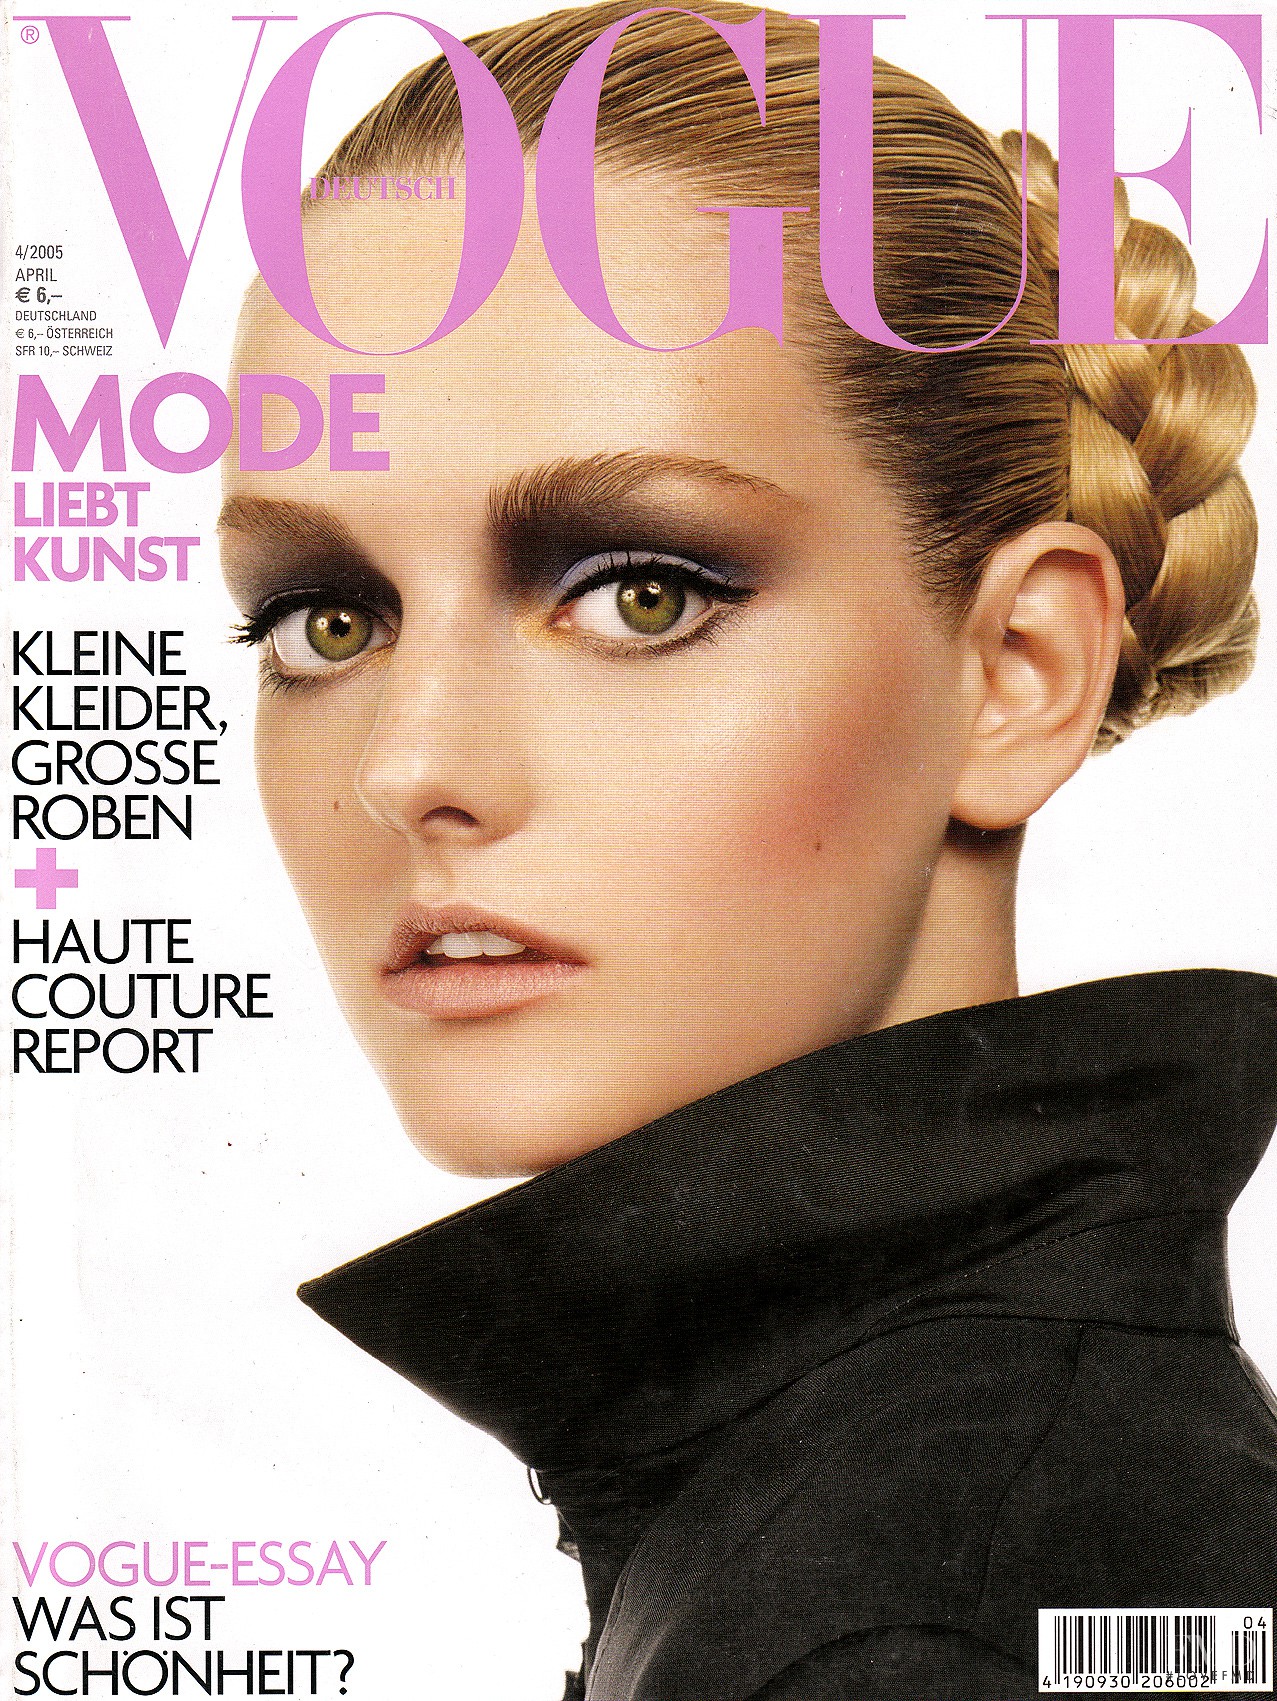 Cover of Vogue Germany with Lydia Hearst, April 2005 (ID:24428 ...